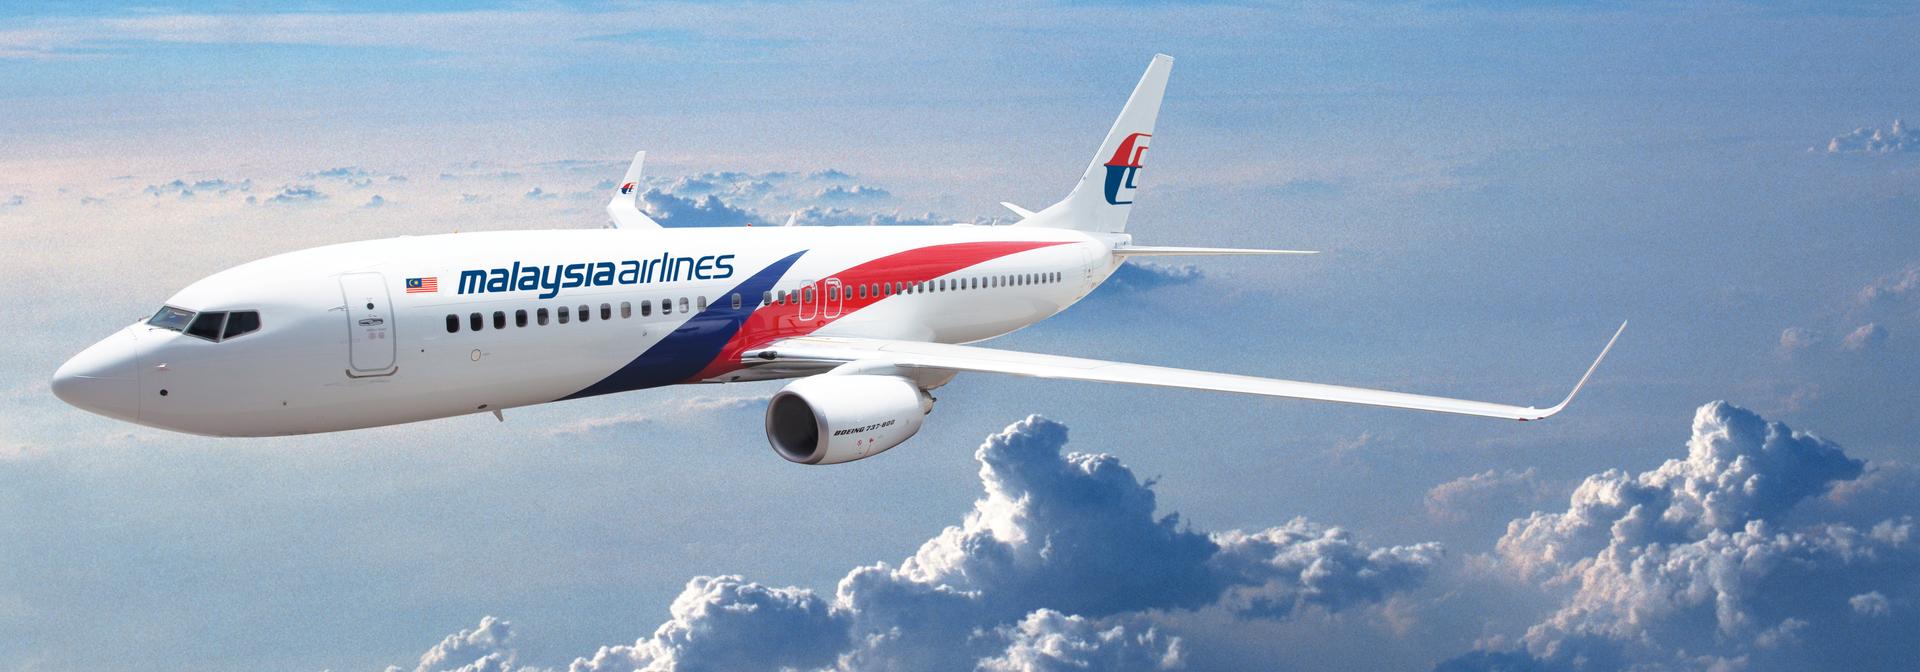 Malaysia Airlines MHflypass